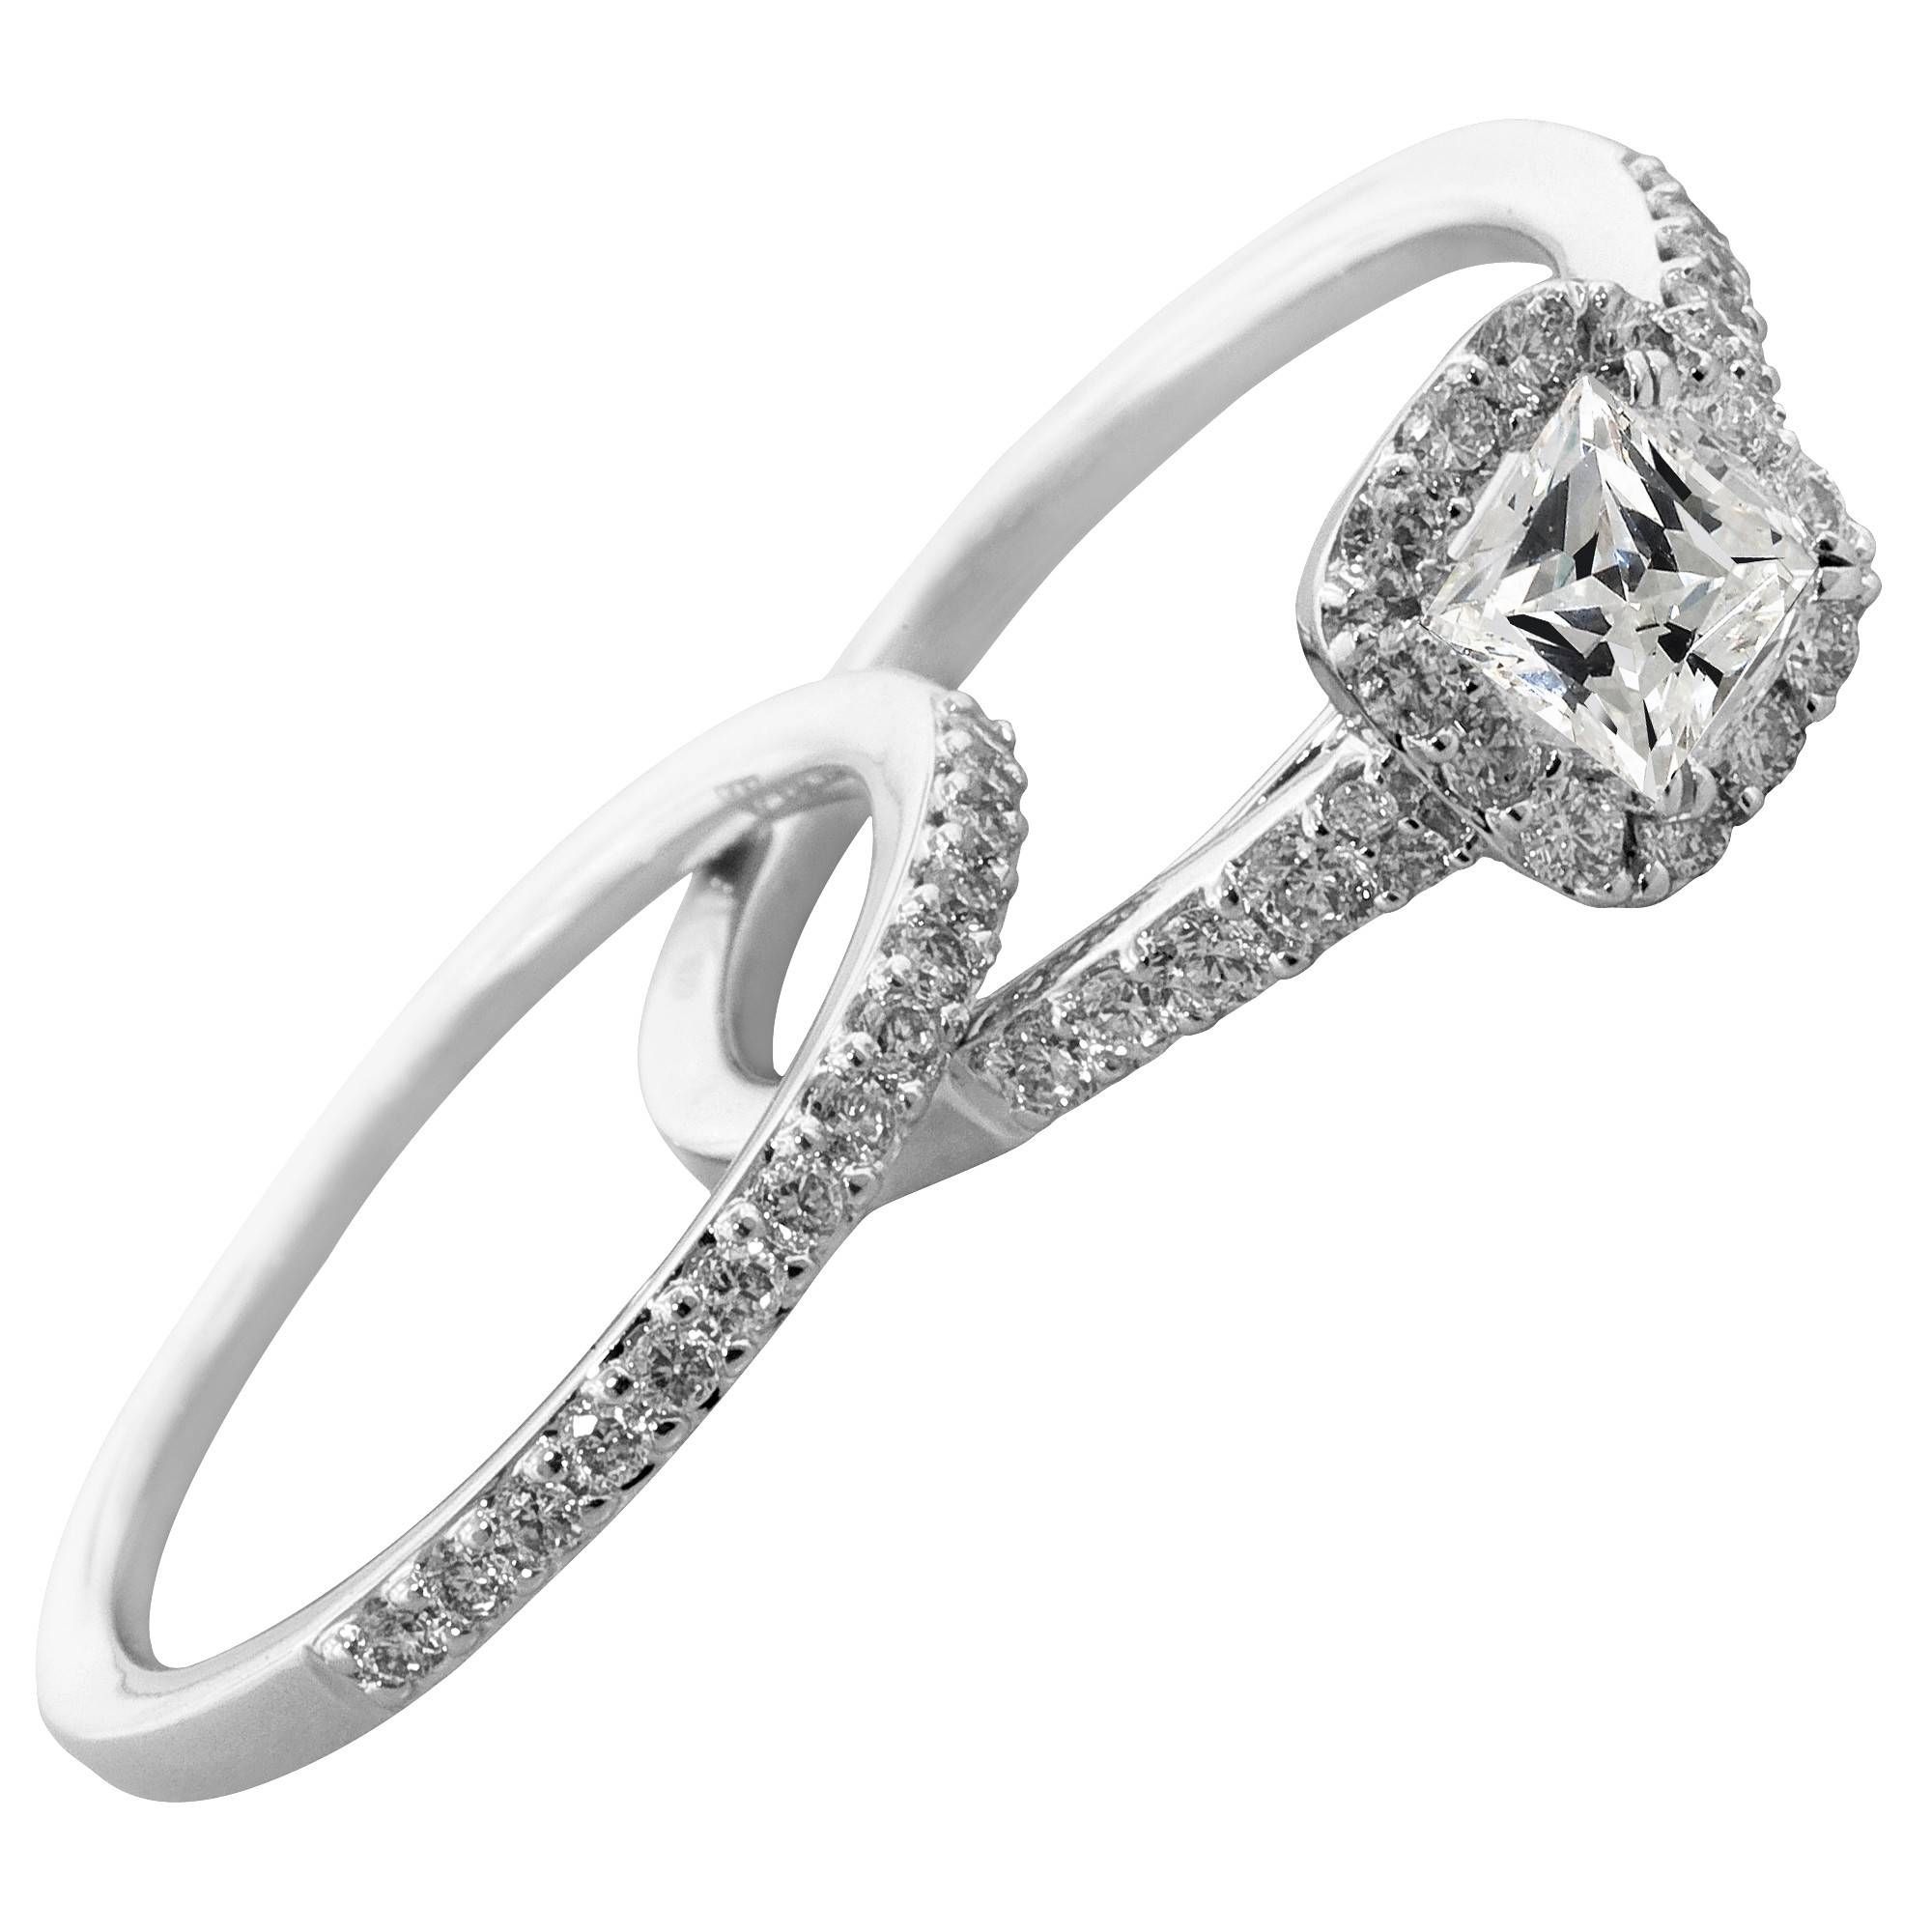 Northern Star Cushion Cut Diamond Ring With Matching Wedding Band Regarding Most Recent Cushion Cut Anniversary Rings (View 7 of 25)